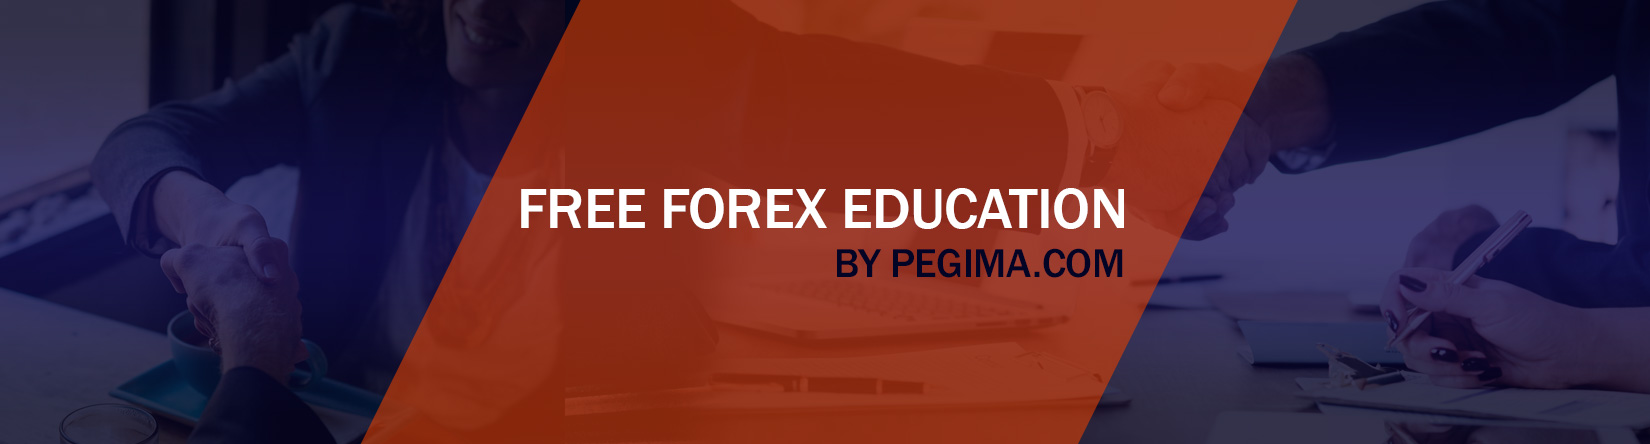 Learn-Forex-Trading-With-Pegima-Education-Free-hm